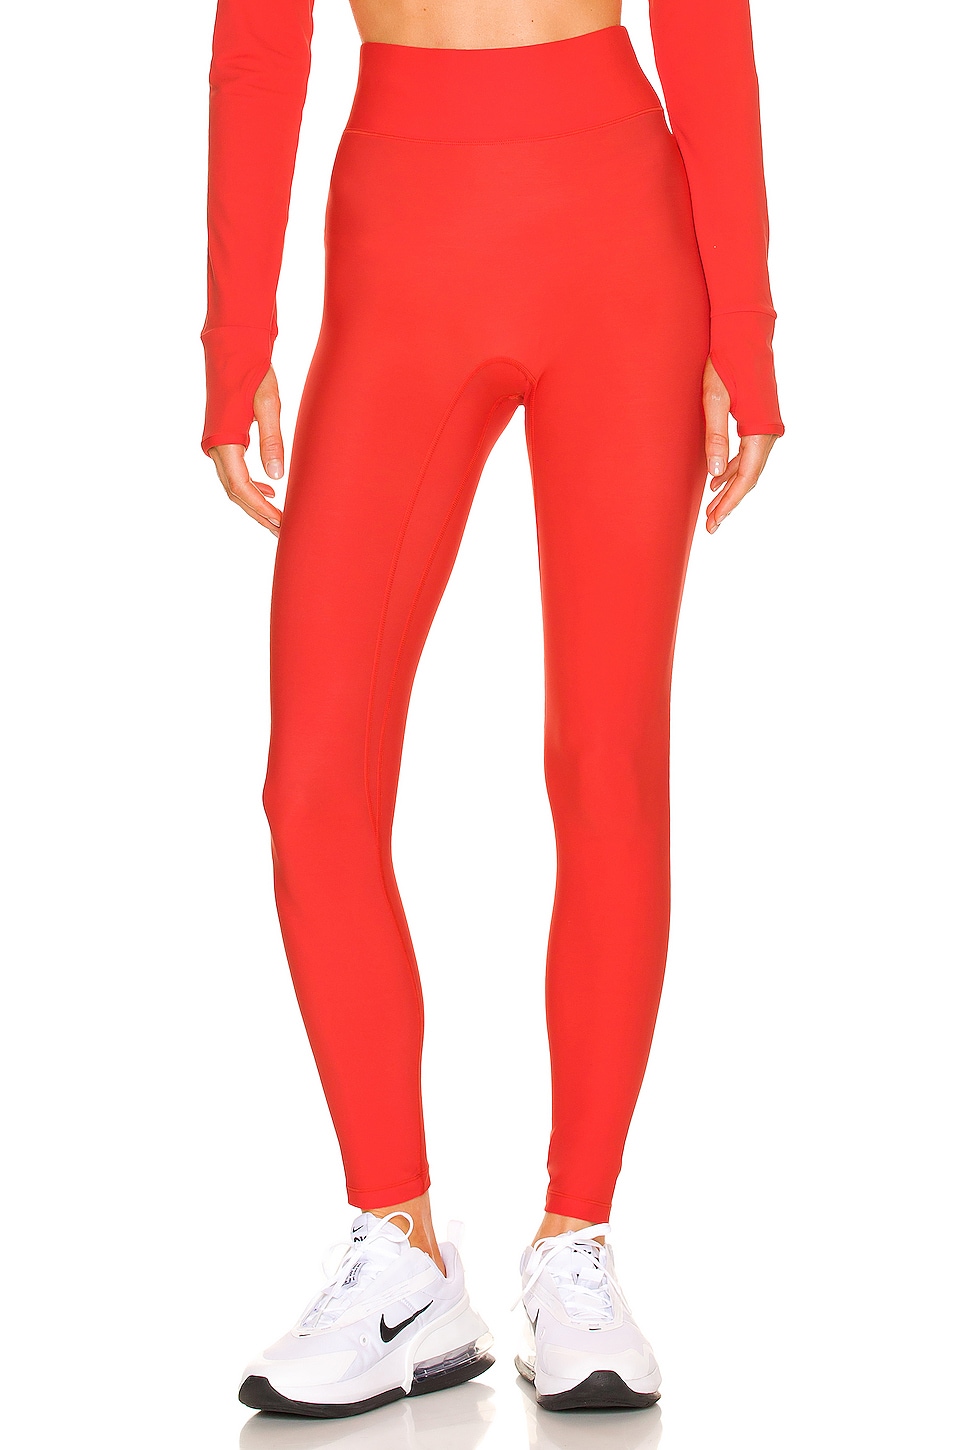 All Access Pro Fleece Center Stage Legging Flame Scarlet